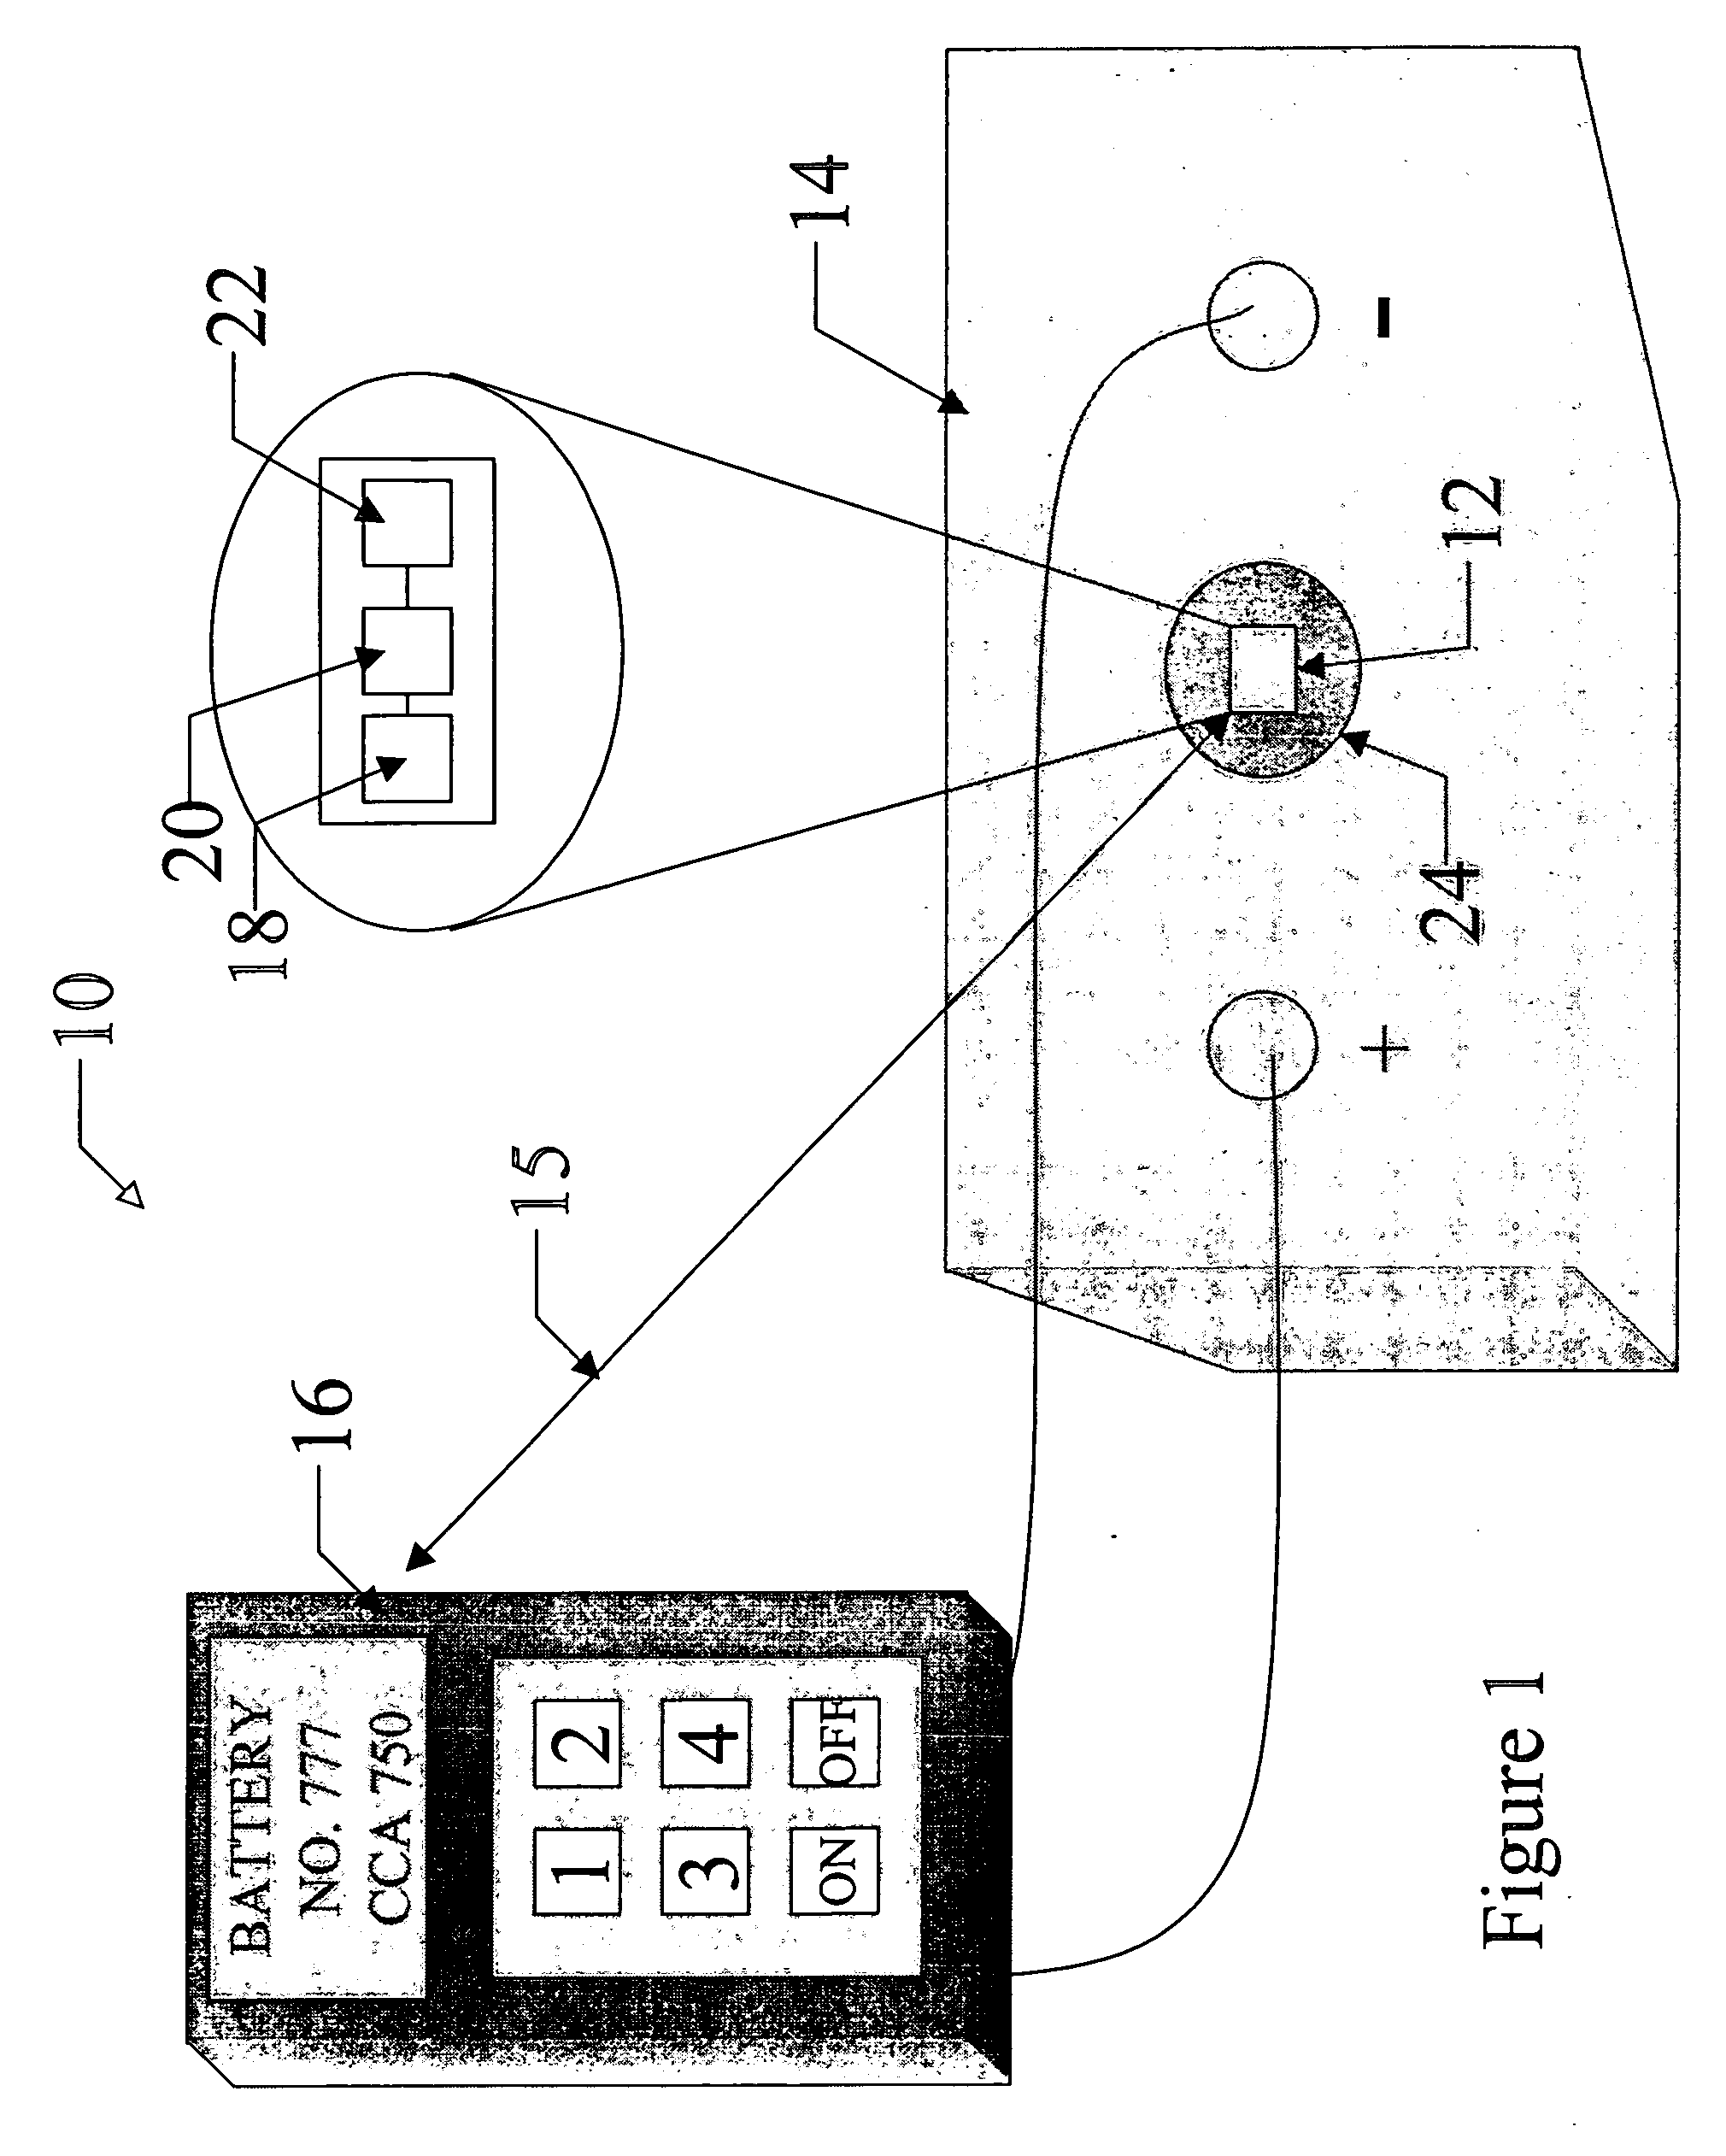 Systems and methods for monitoring and storing performance and maintenance data related to an electrical component